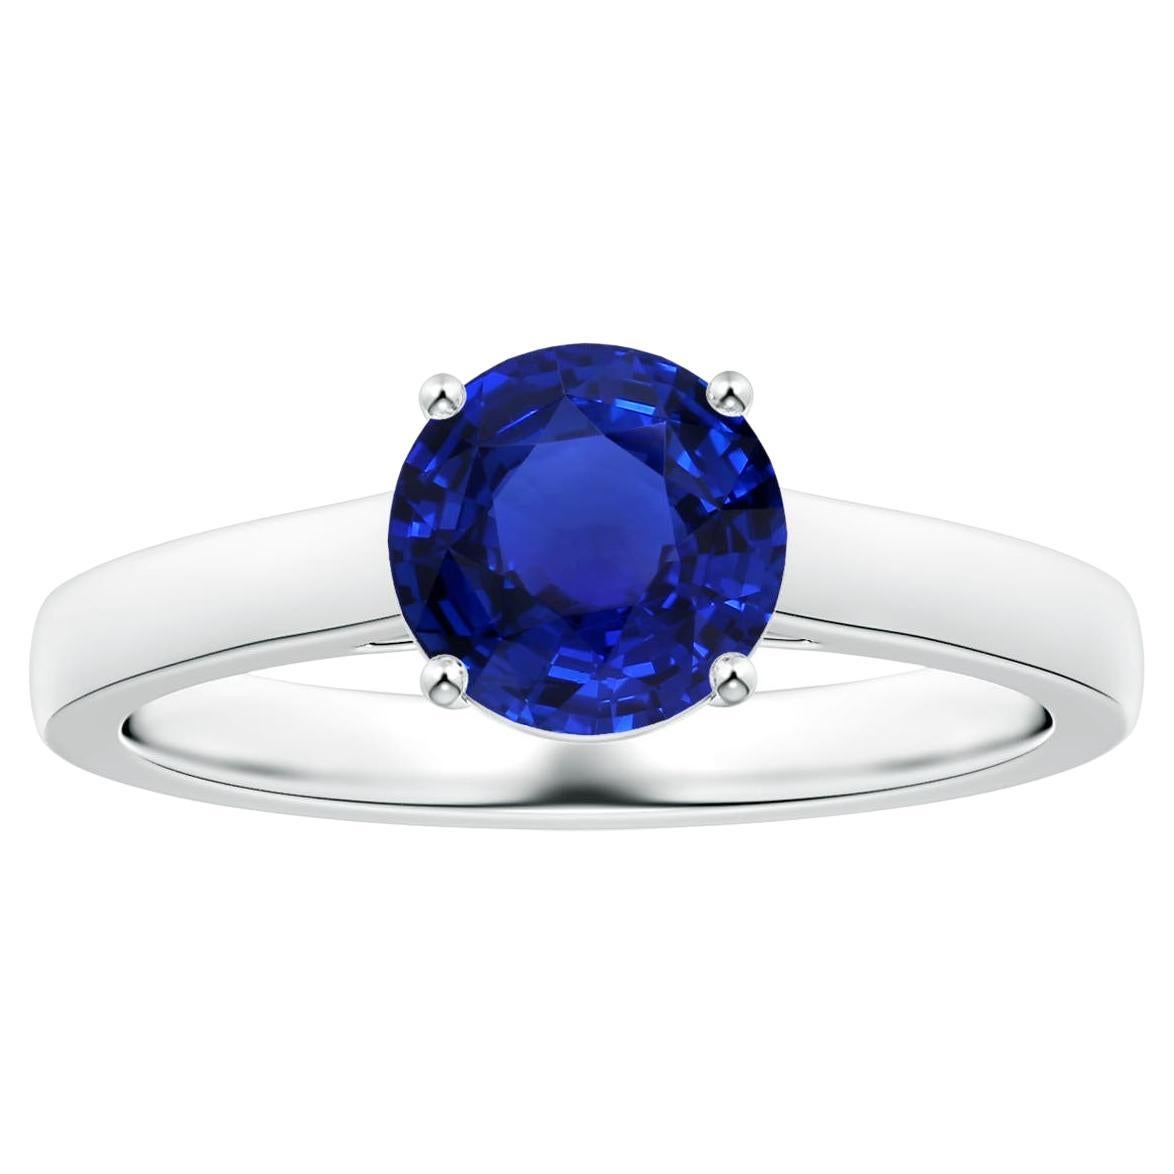 For Sale:  ANGARA Prong-Set GIA Certified Round Blue Sapphire Solitaire Ring in Platinum